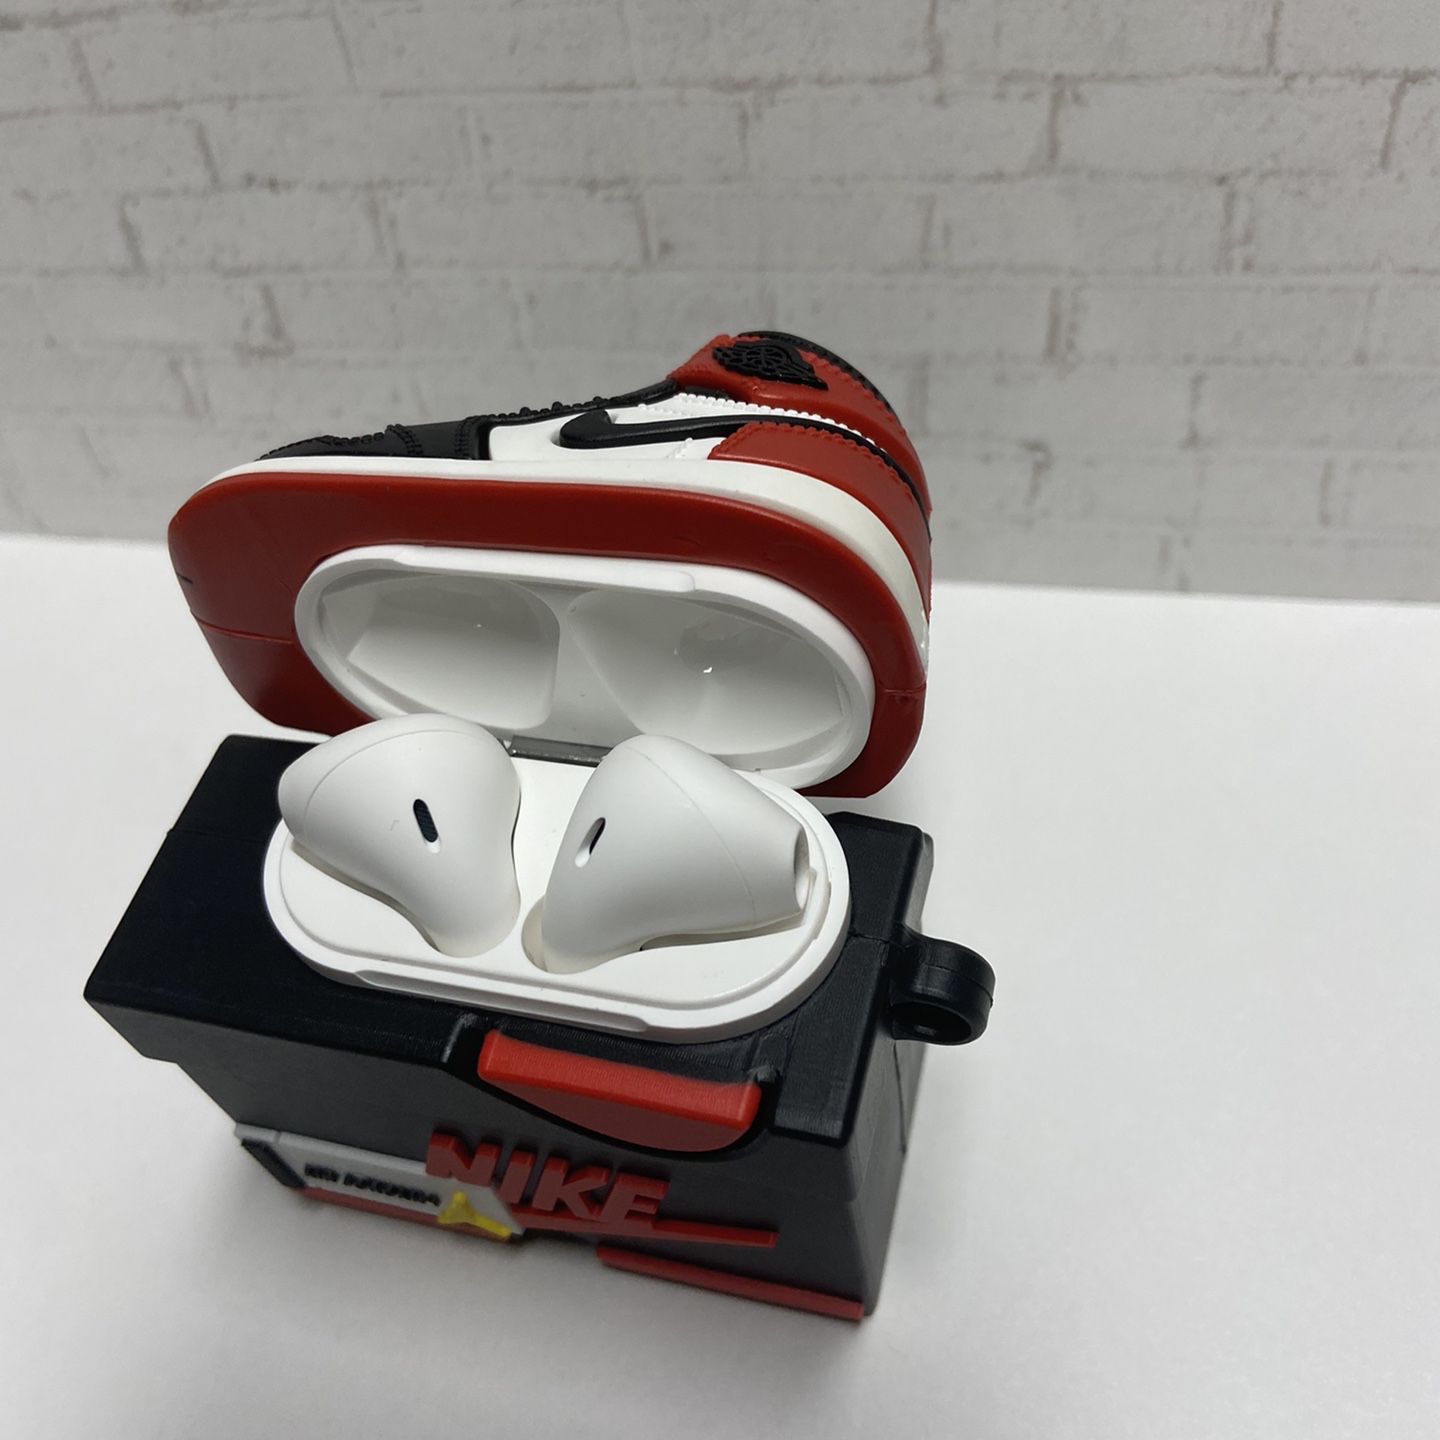 Louis Vuitton Supreme Air Pod Pro Hard Case - RED for Sale in Nesconset, NY  - OfferUp